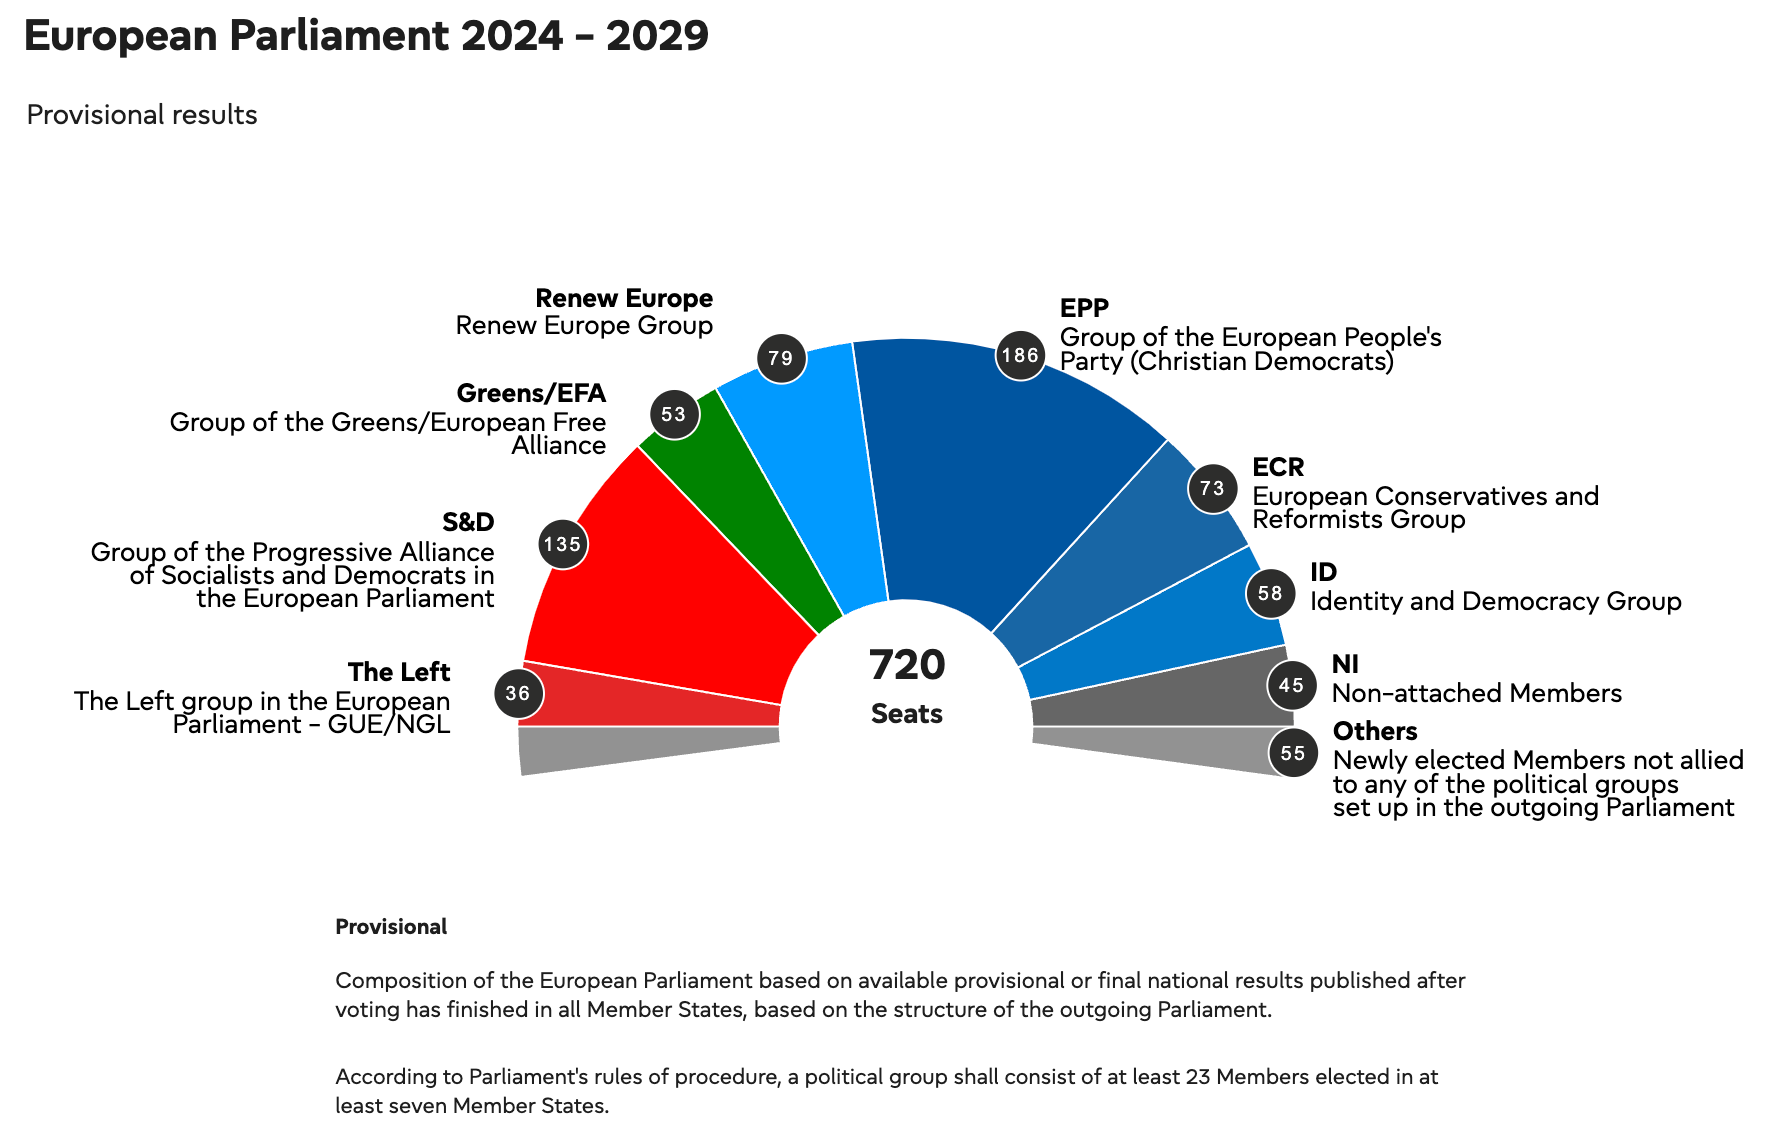 European Parliament 2024 - 2029 election results